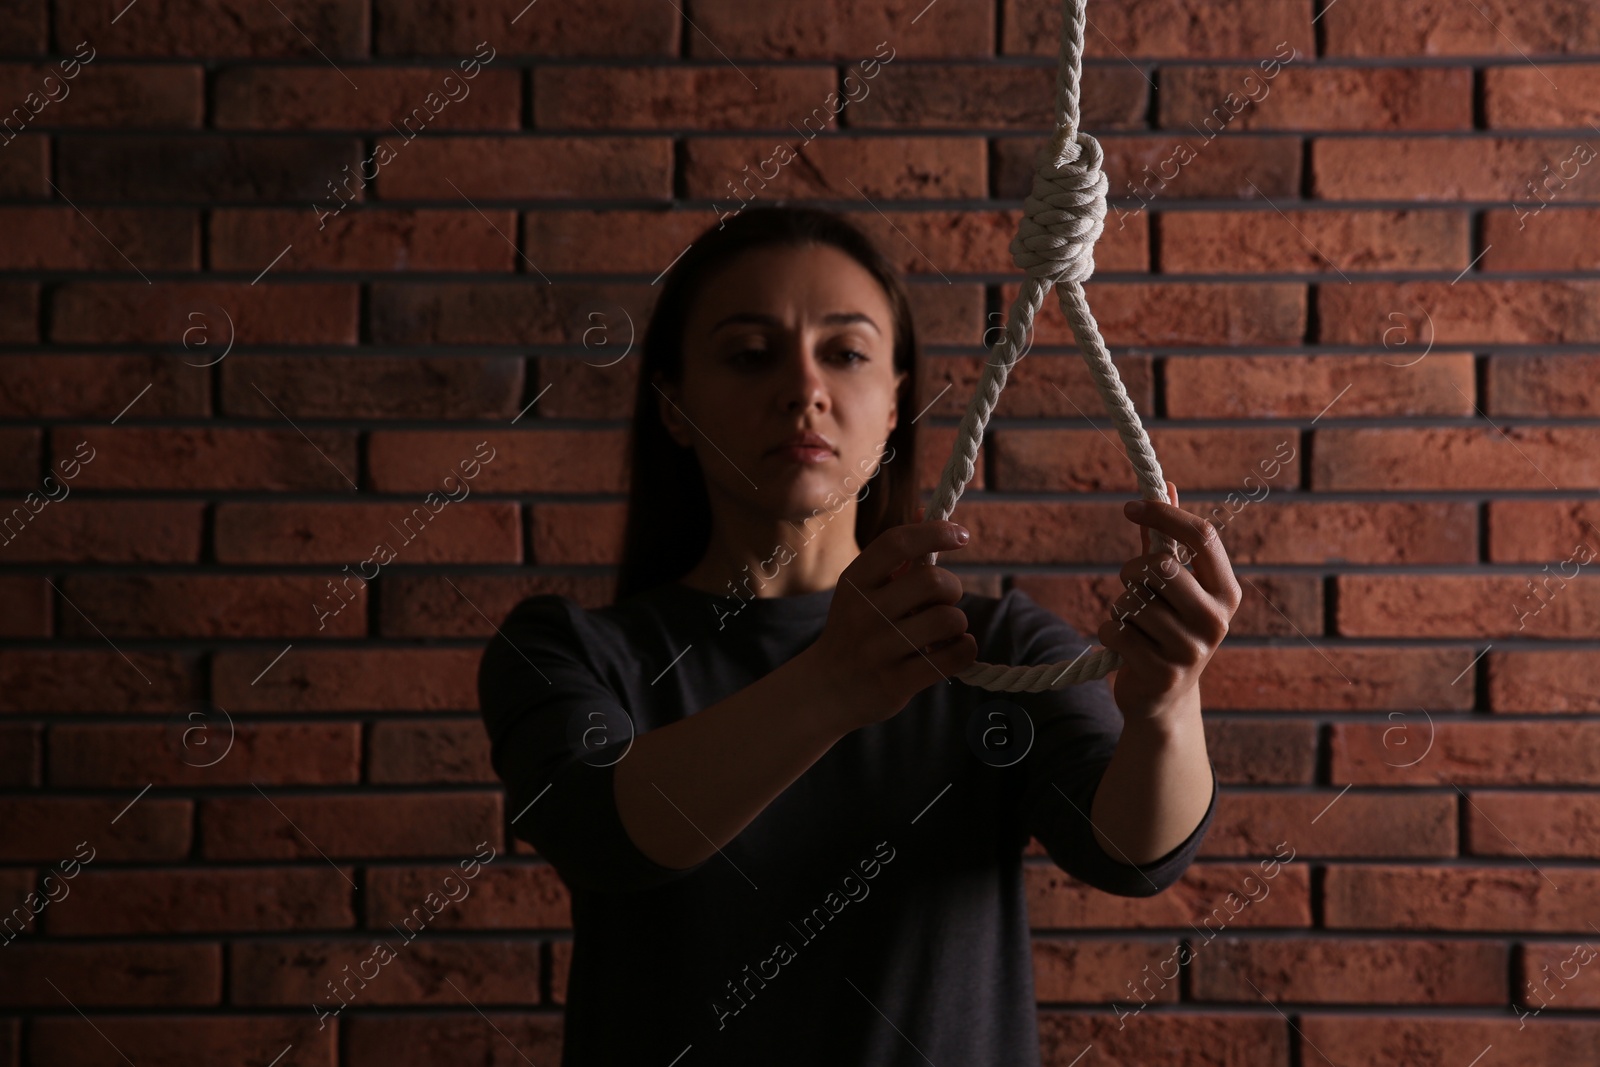 Photo of Depressed woman with rope noose near brick wall